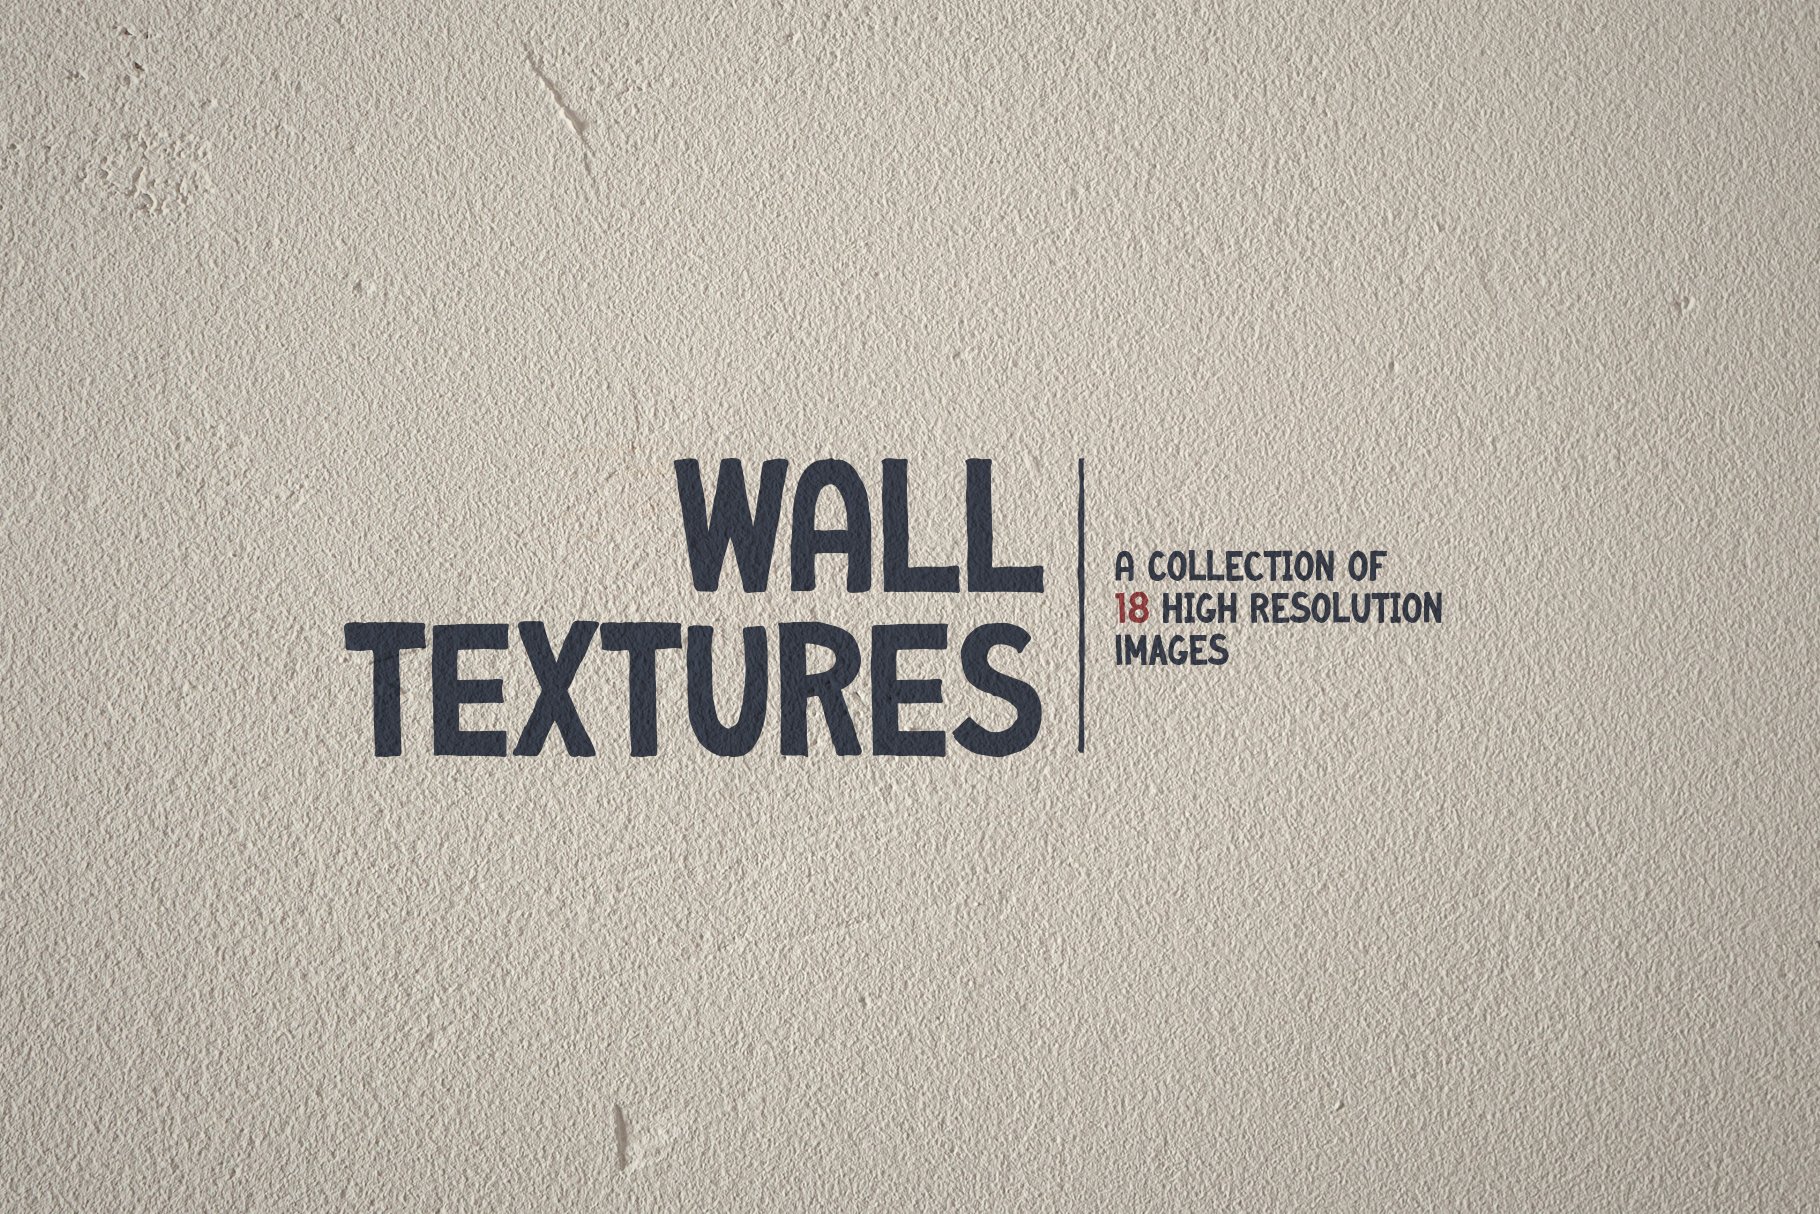 Wall Textures cover image.